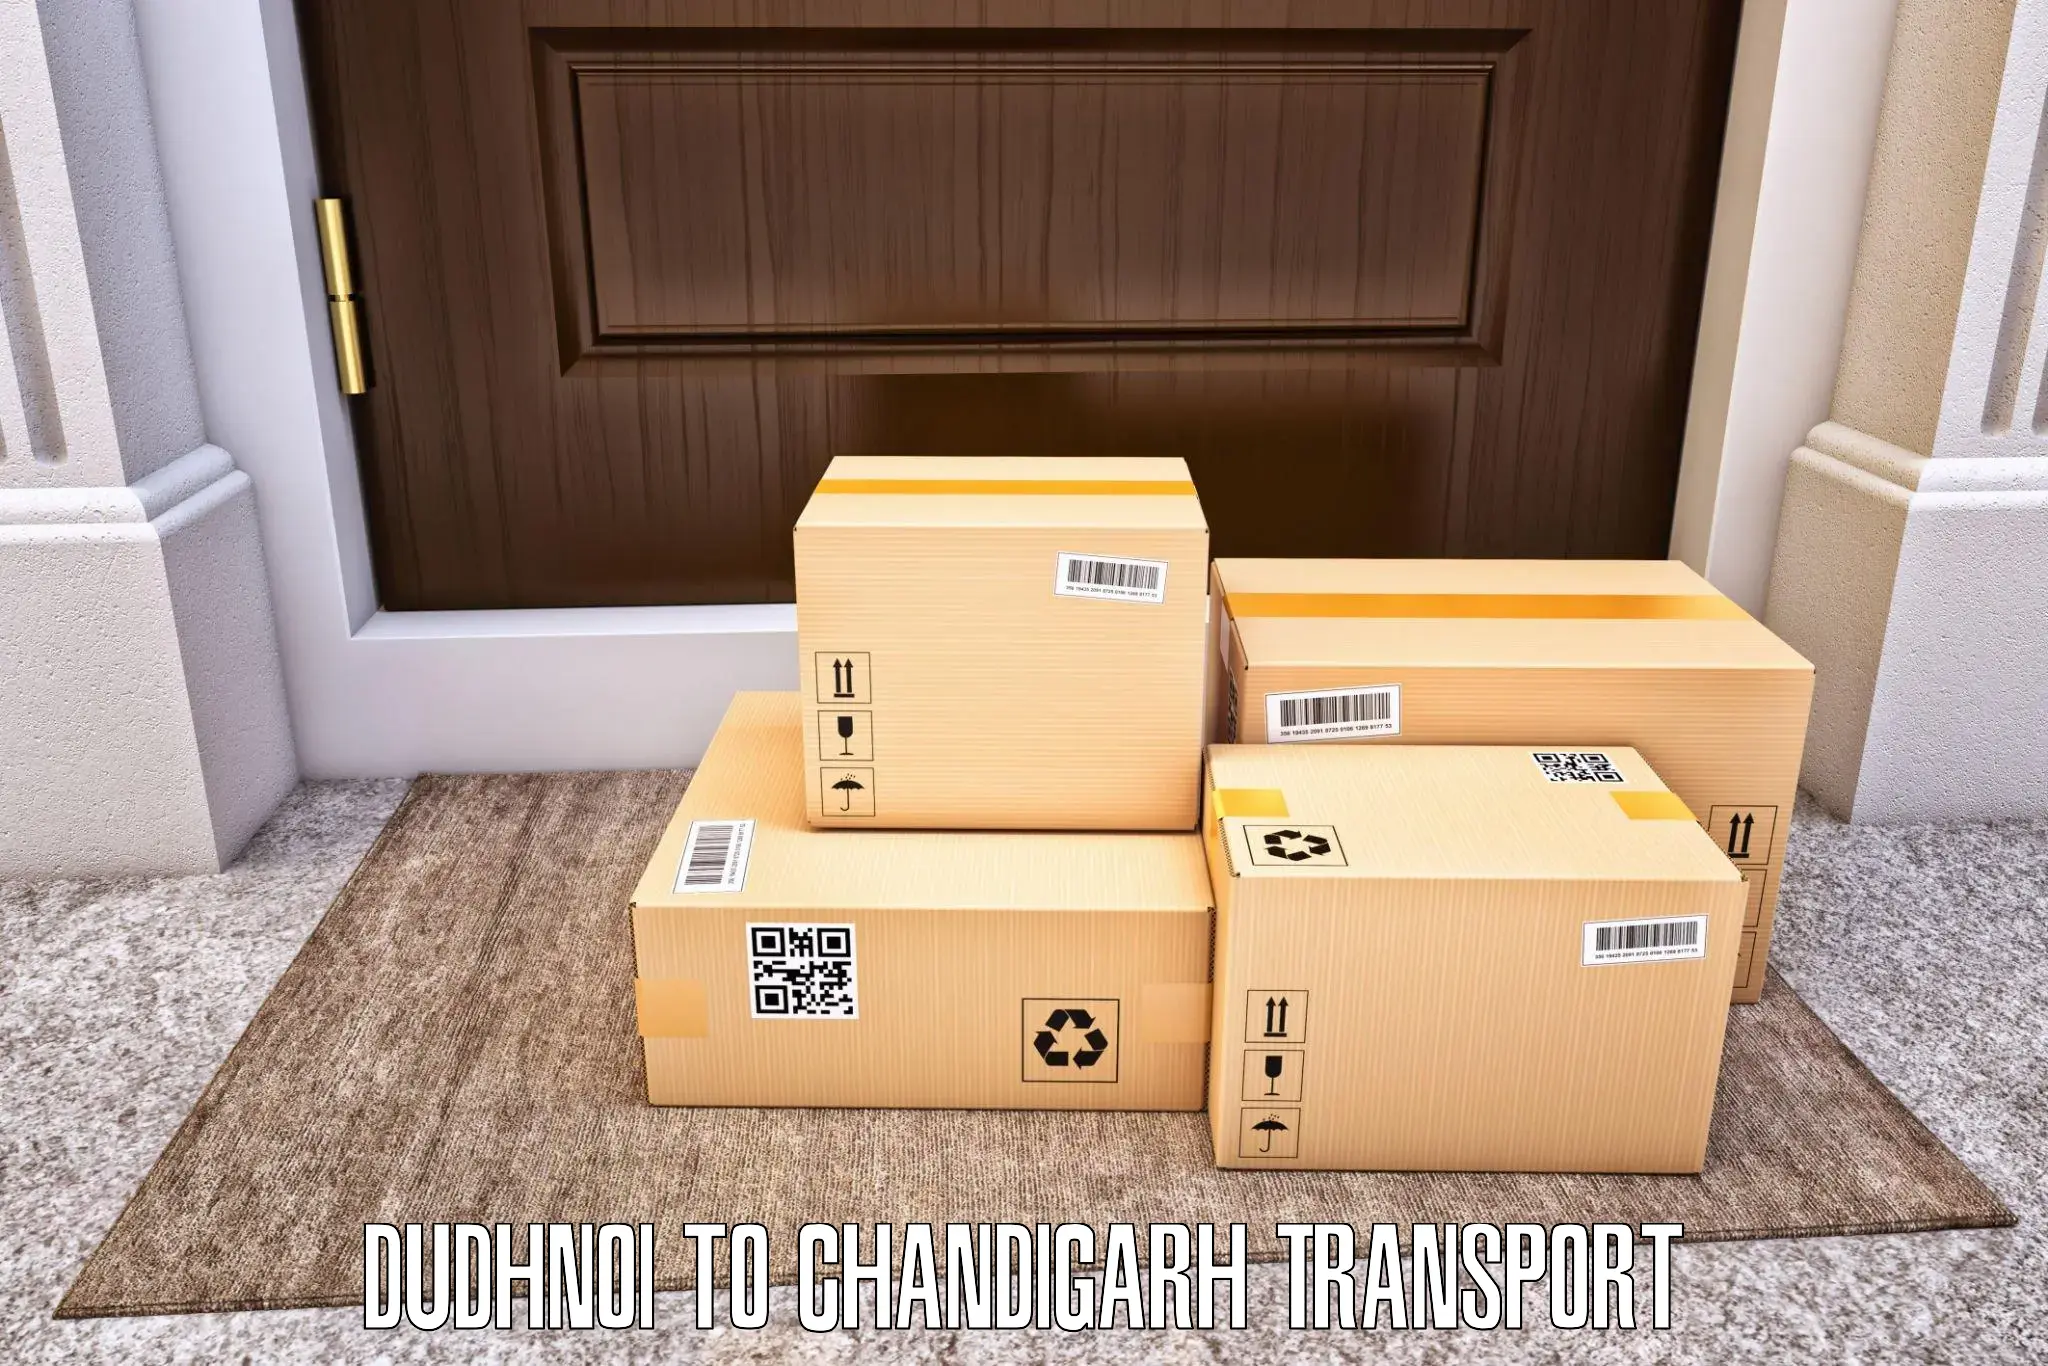 Container transport service Dudhnoi to Chandigarh